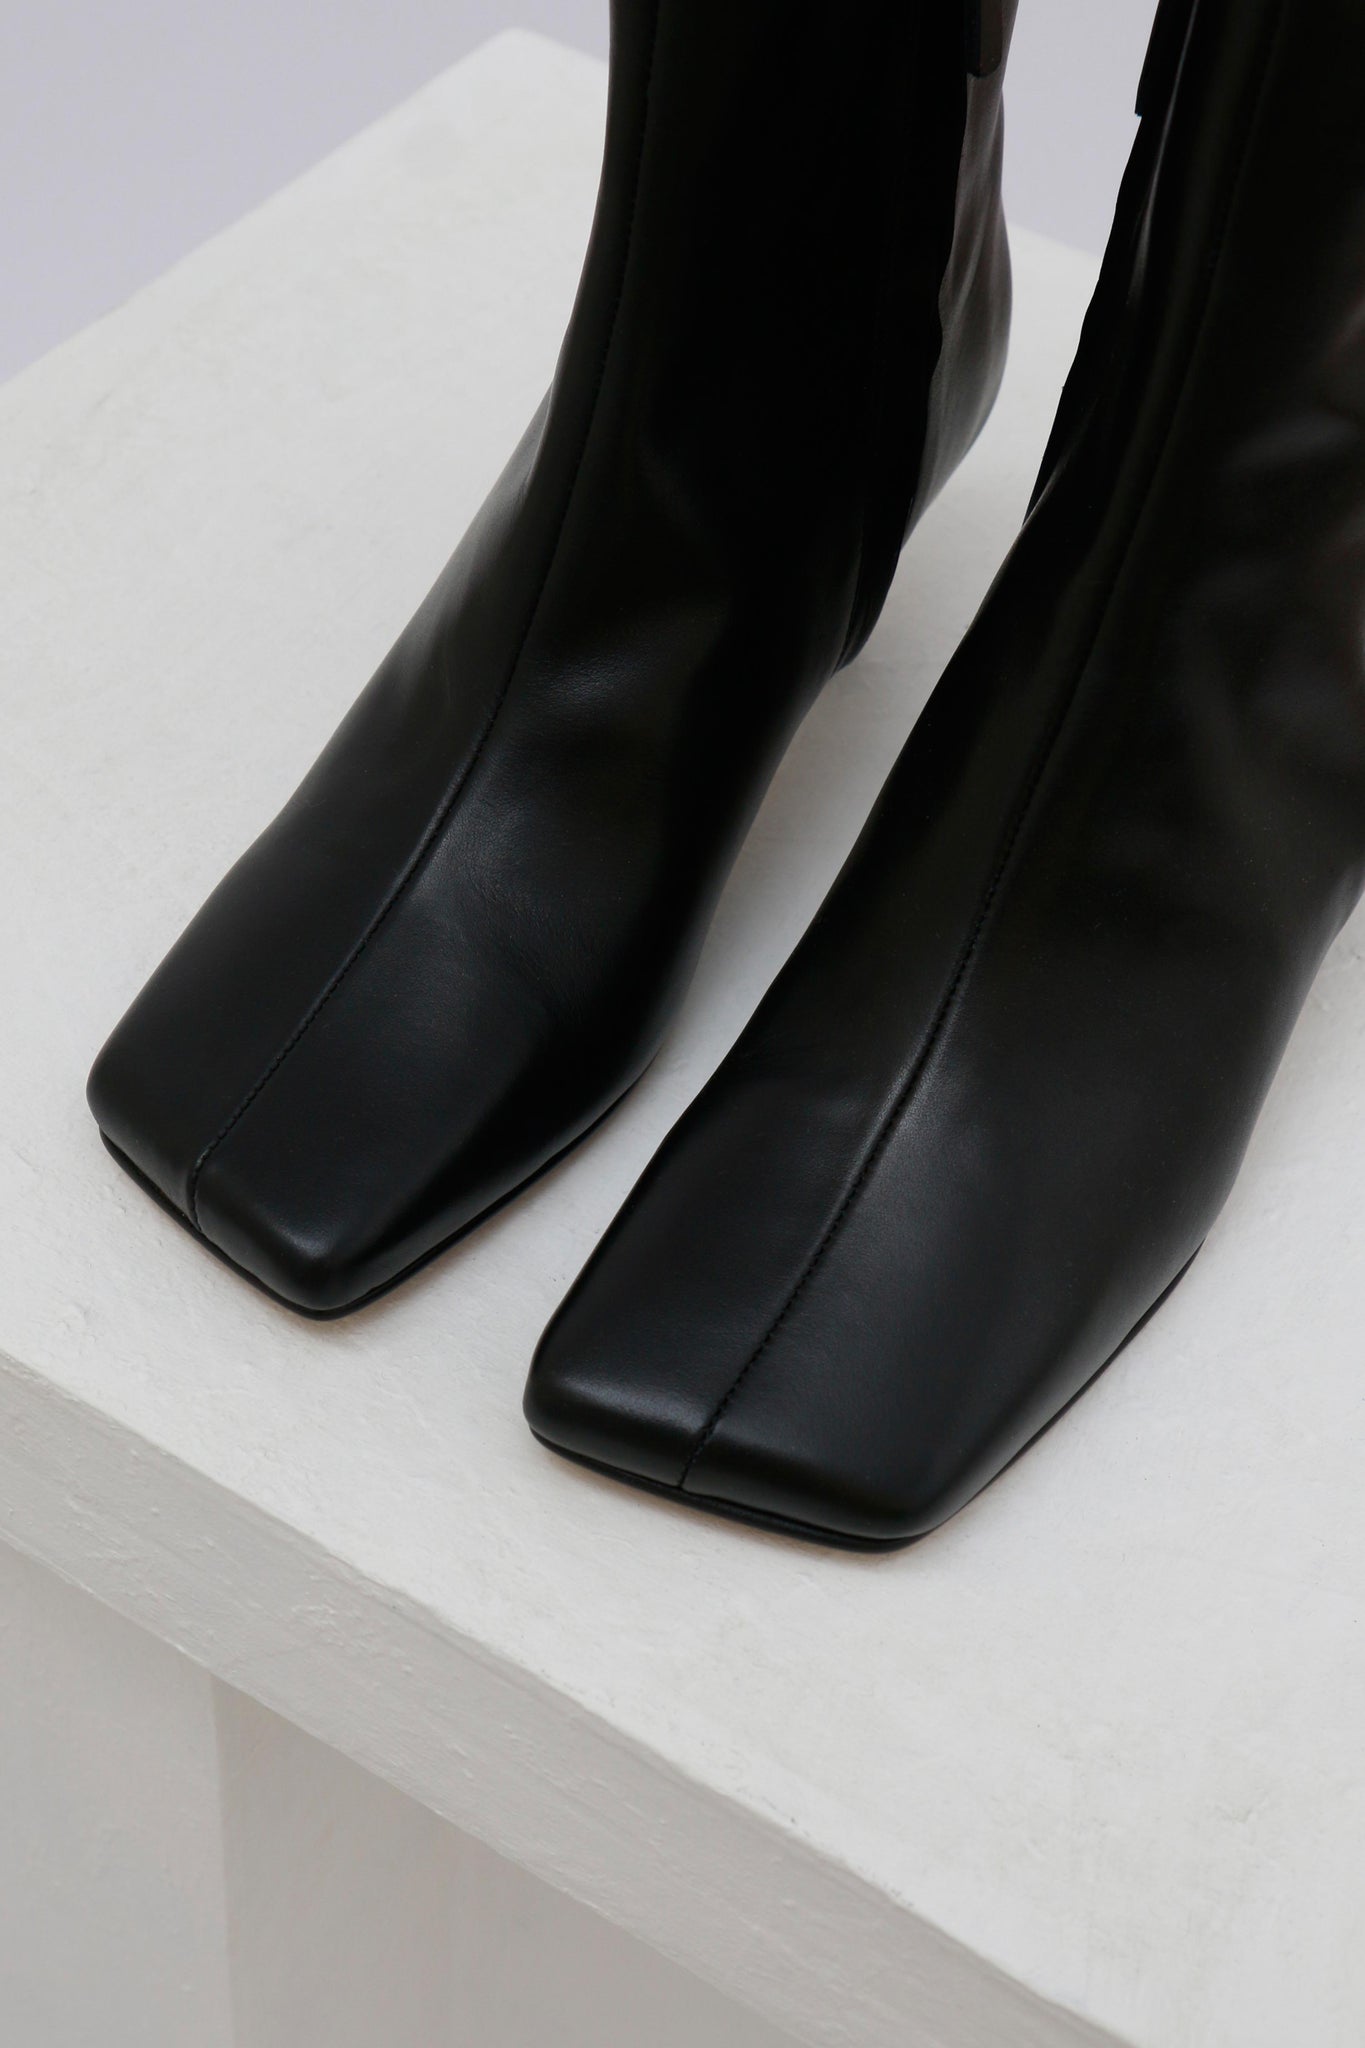 EUGENIA - Black Leather Ankle Boots